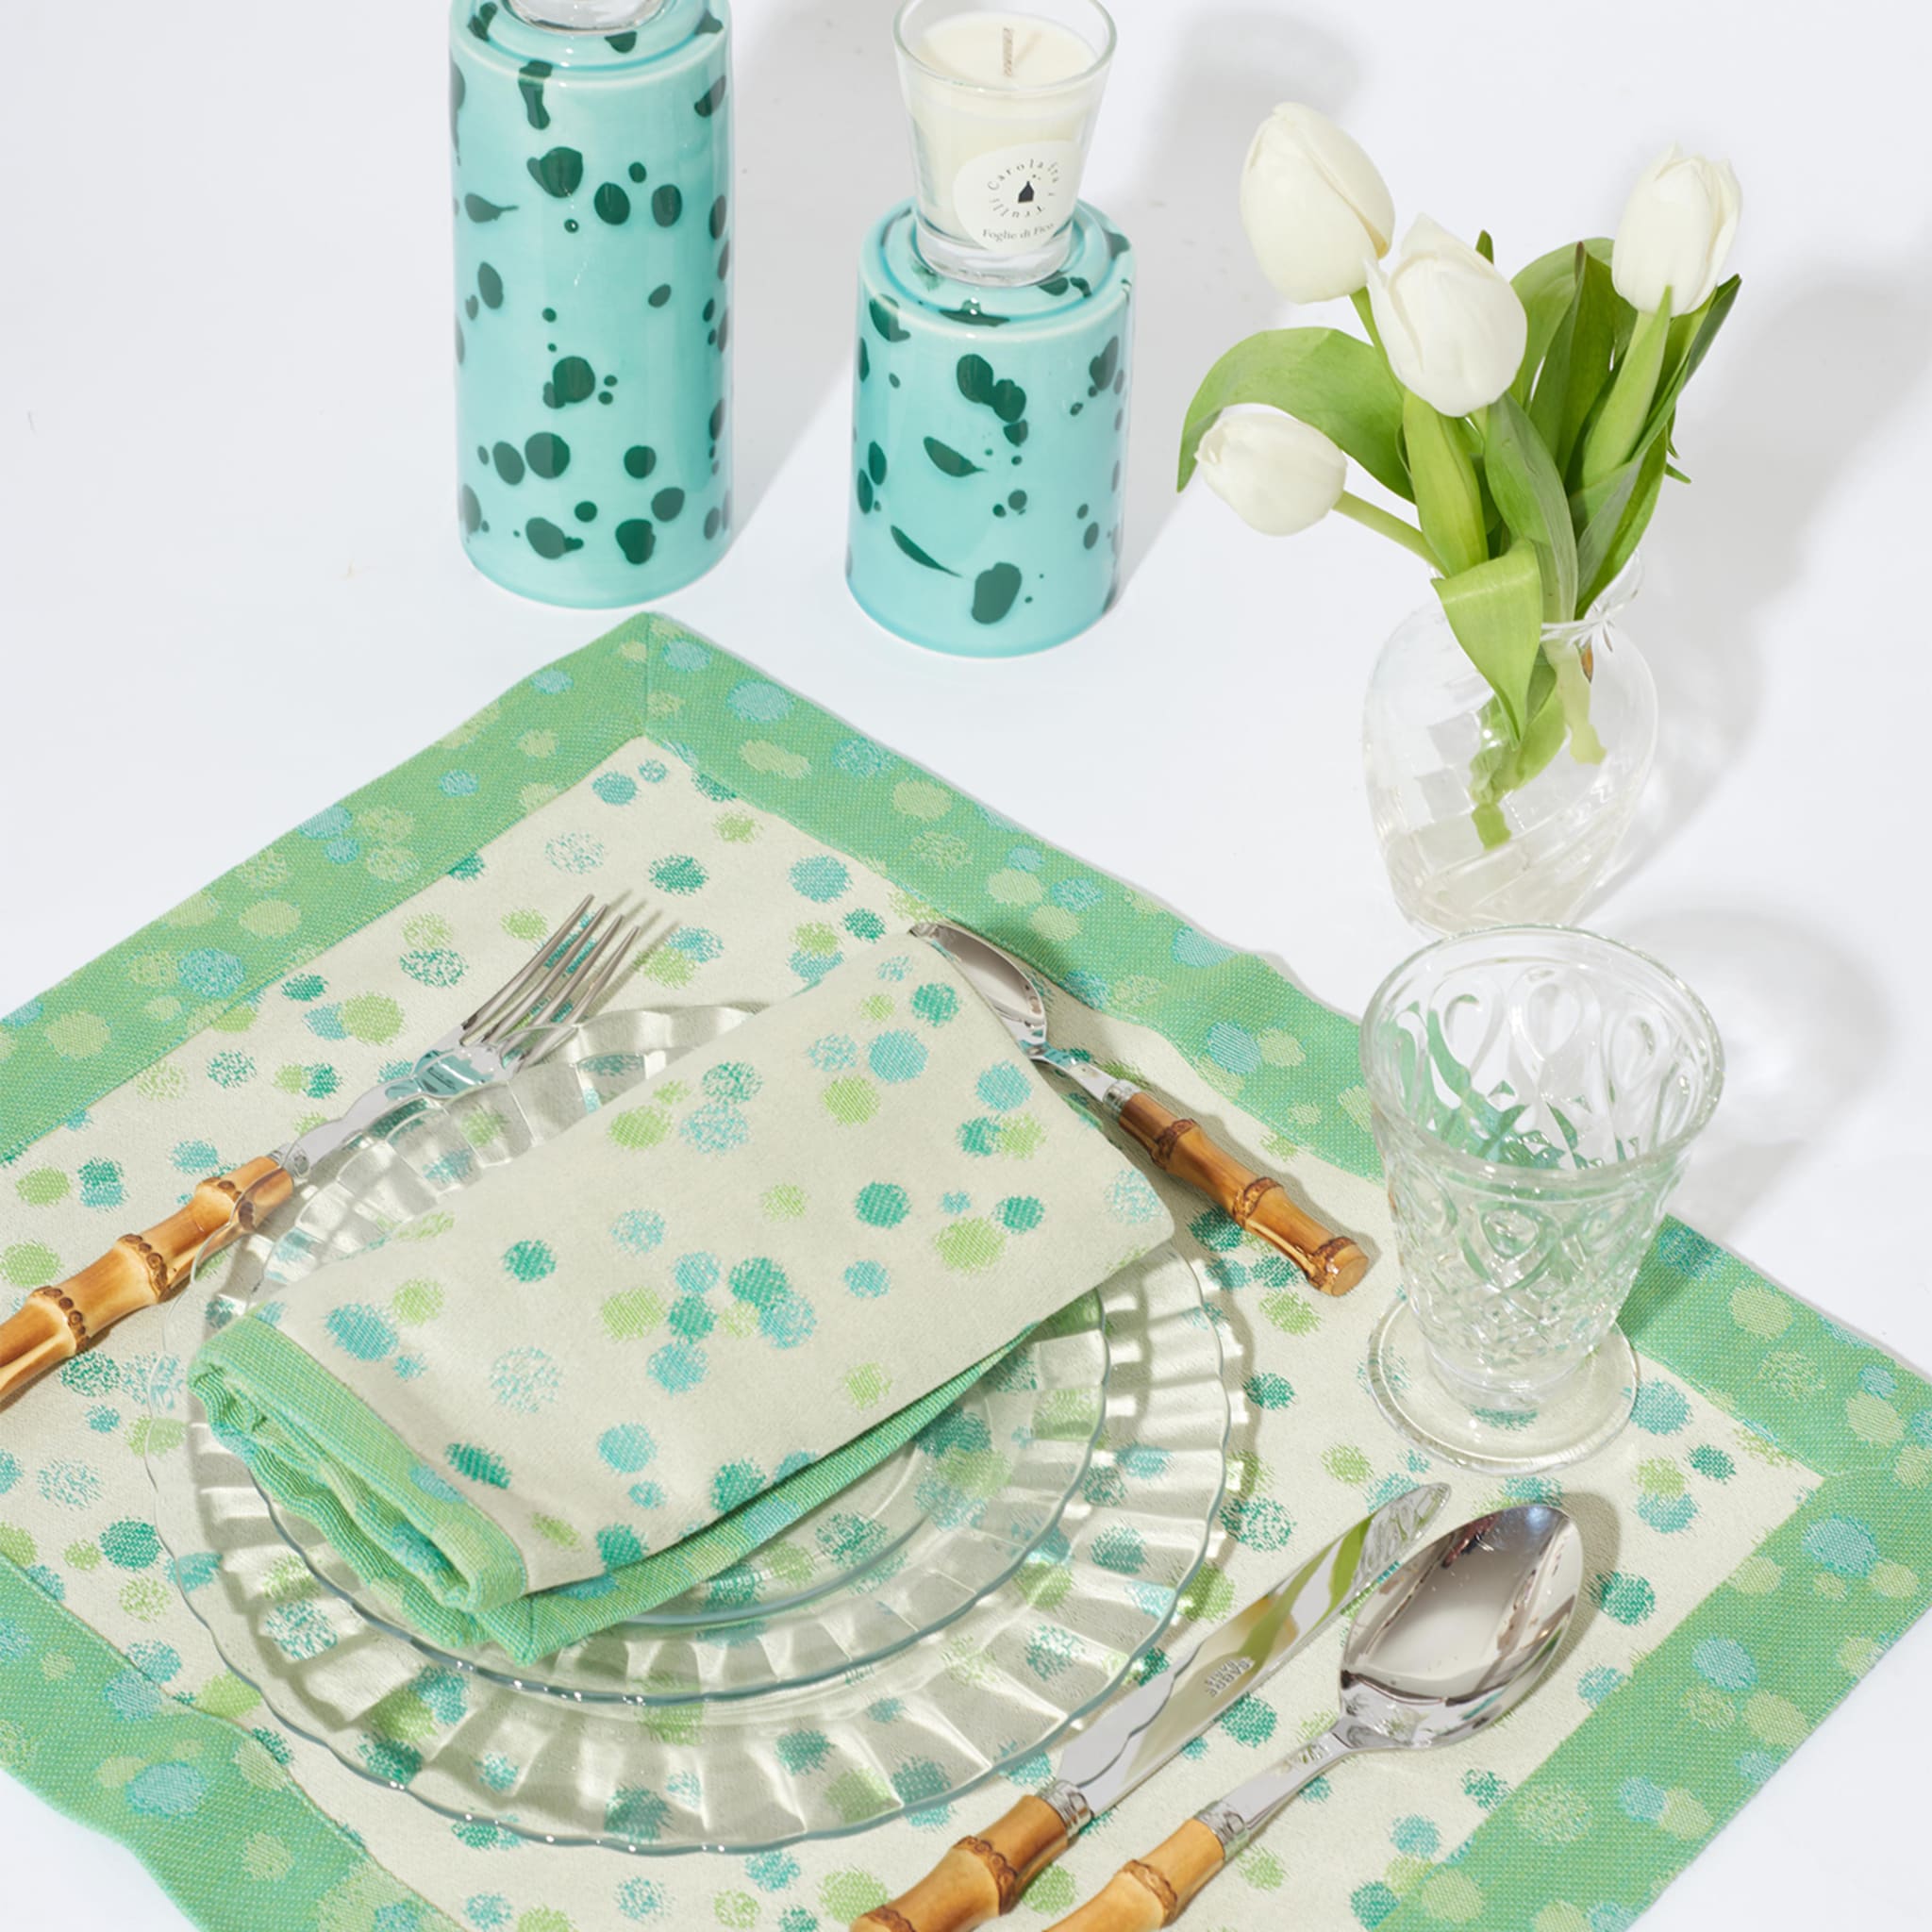 Set of 2 Aqua and Green Placemats with napkins - Alternative view 1